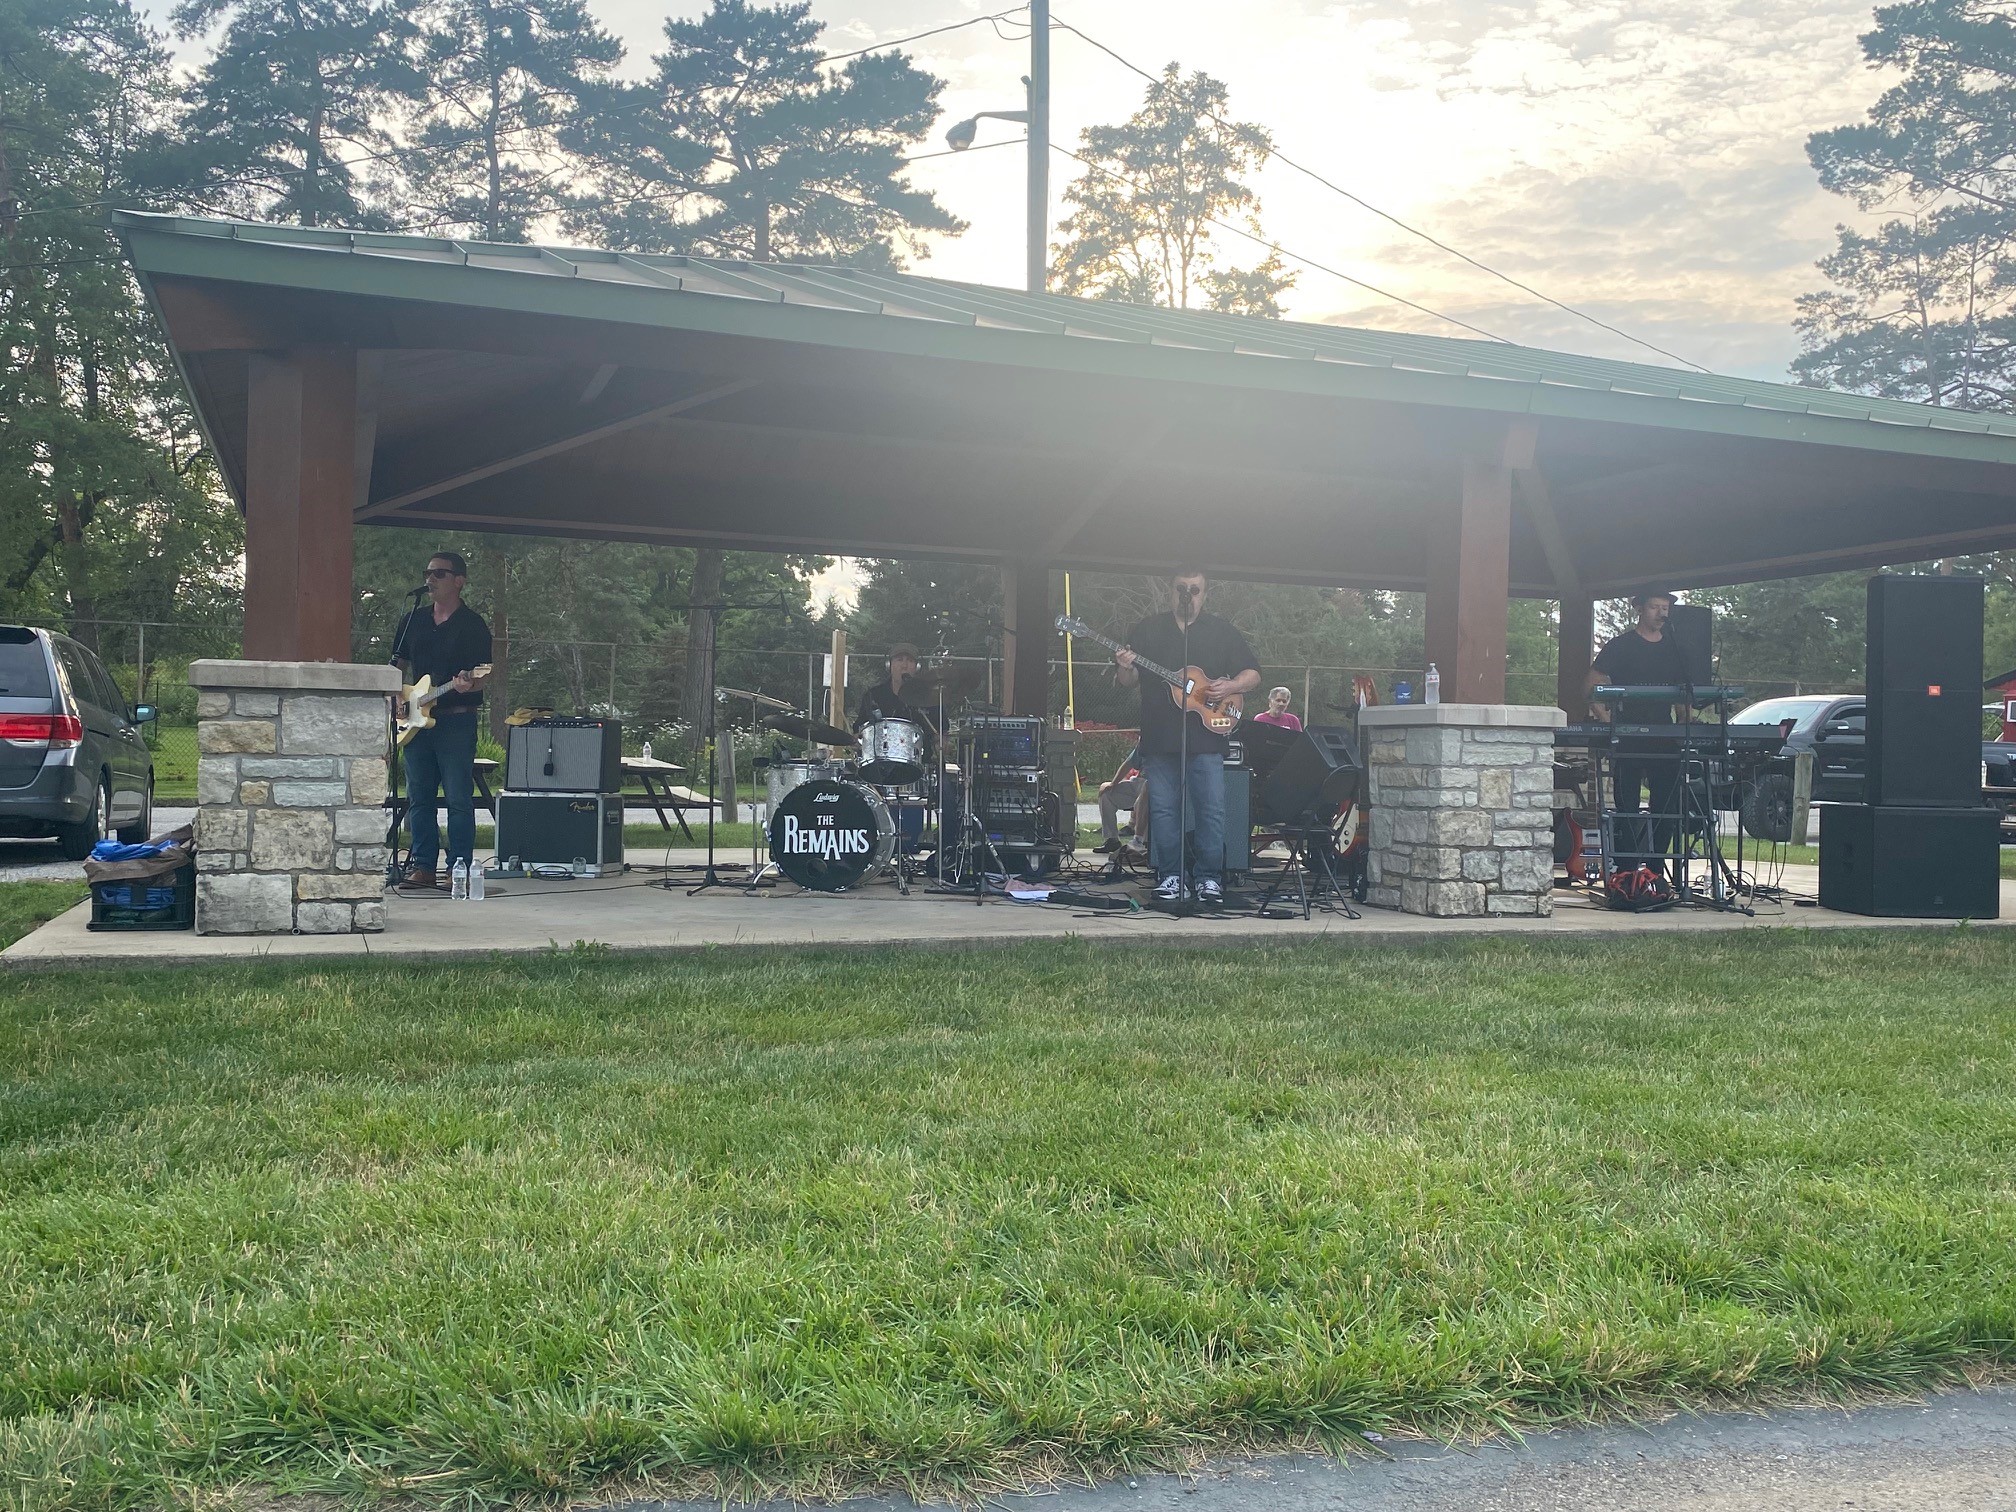 The Remains playing outdoor concert